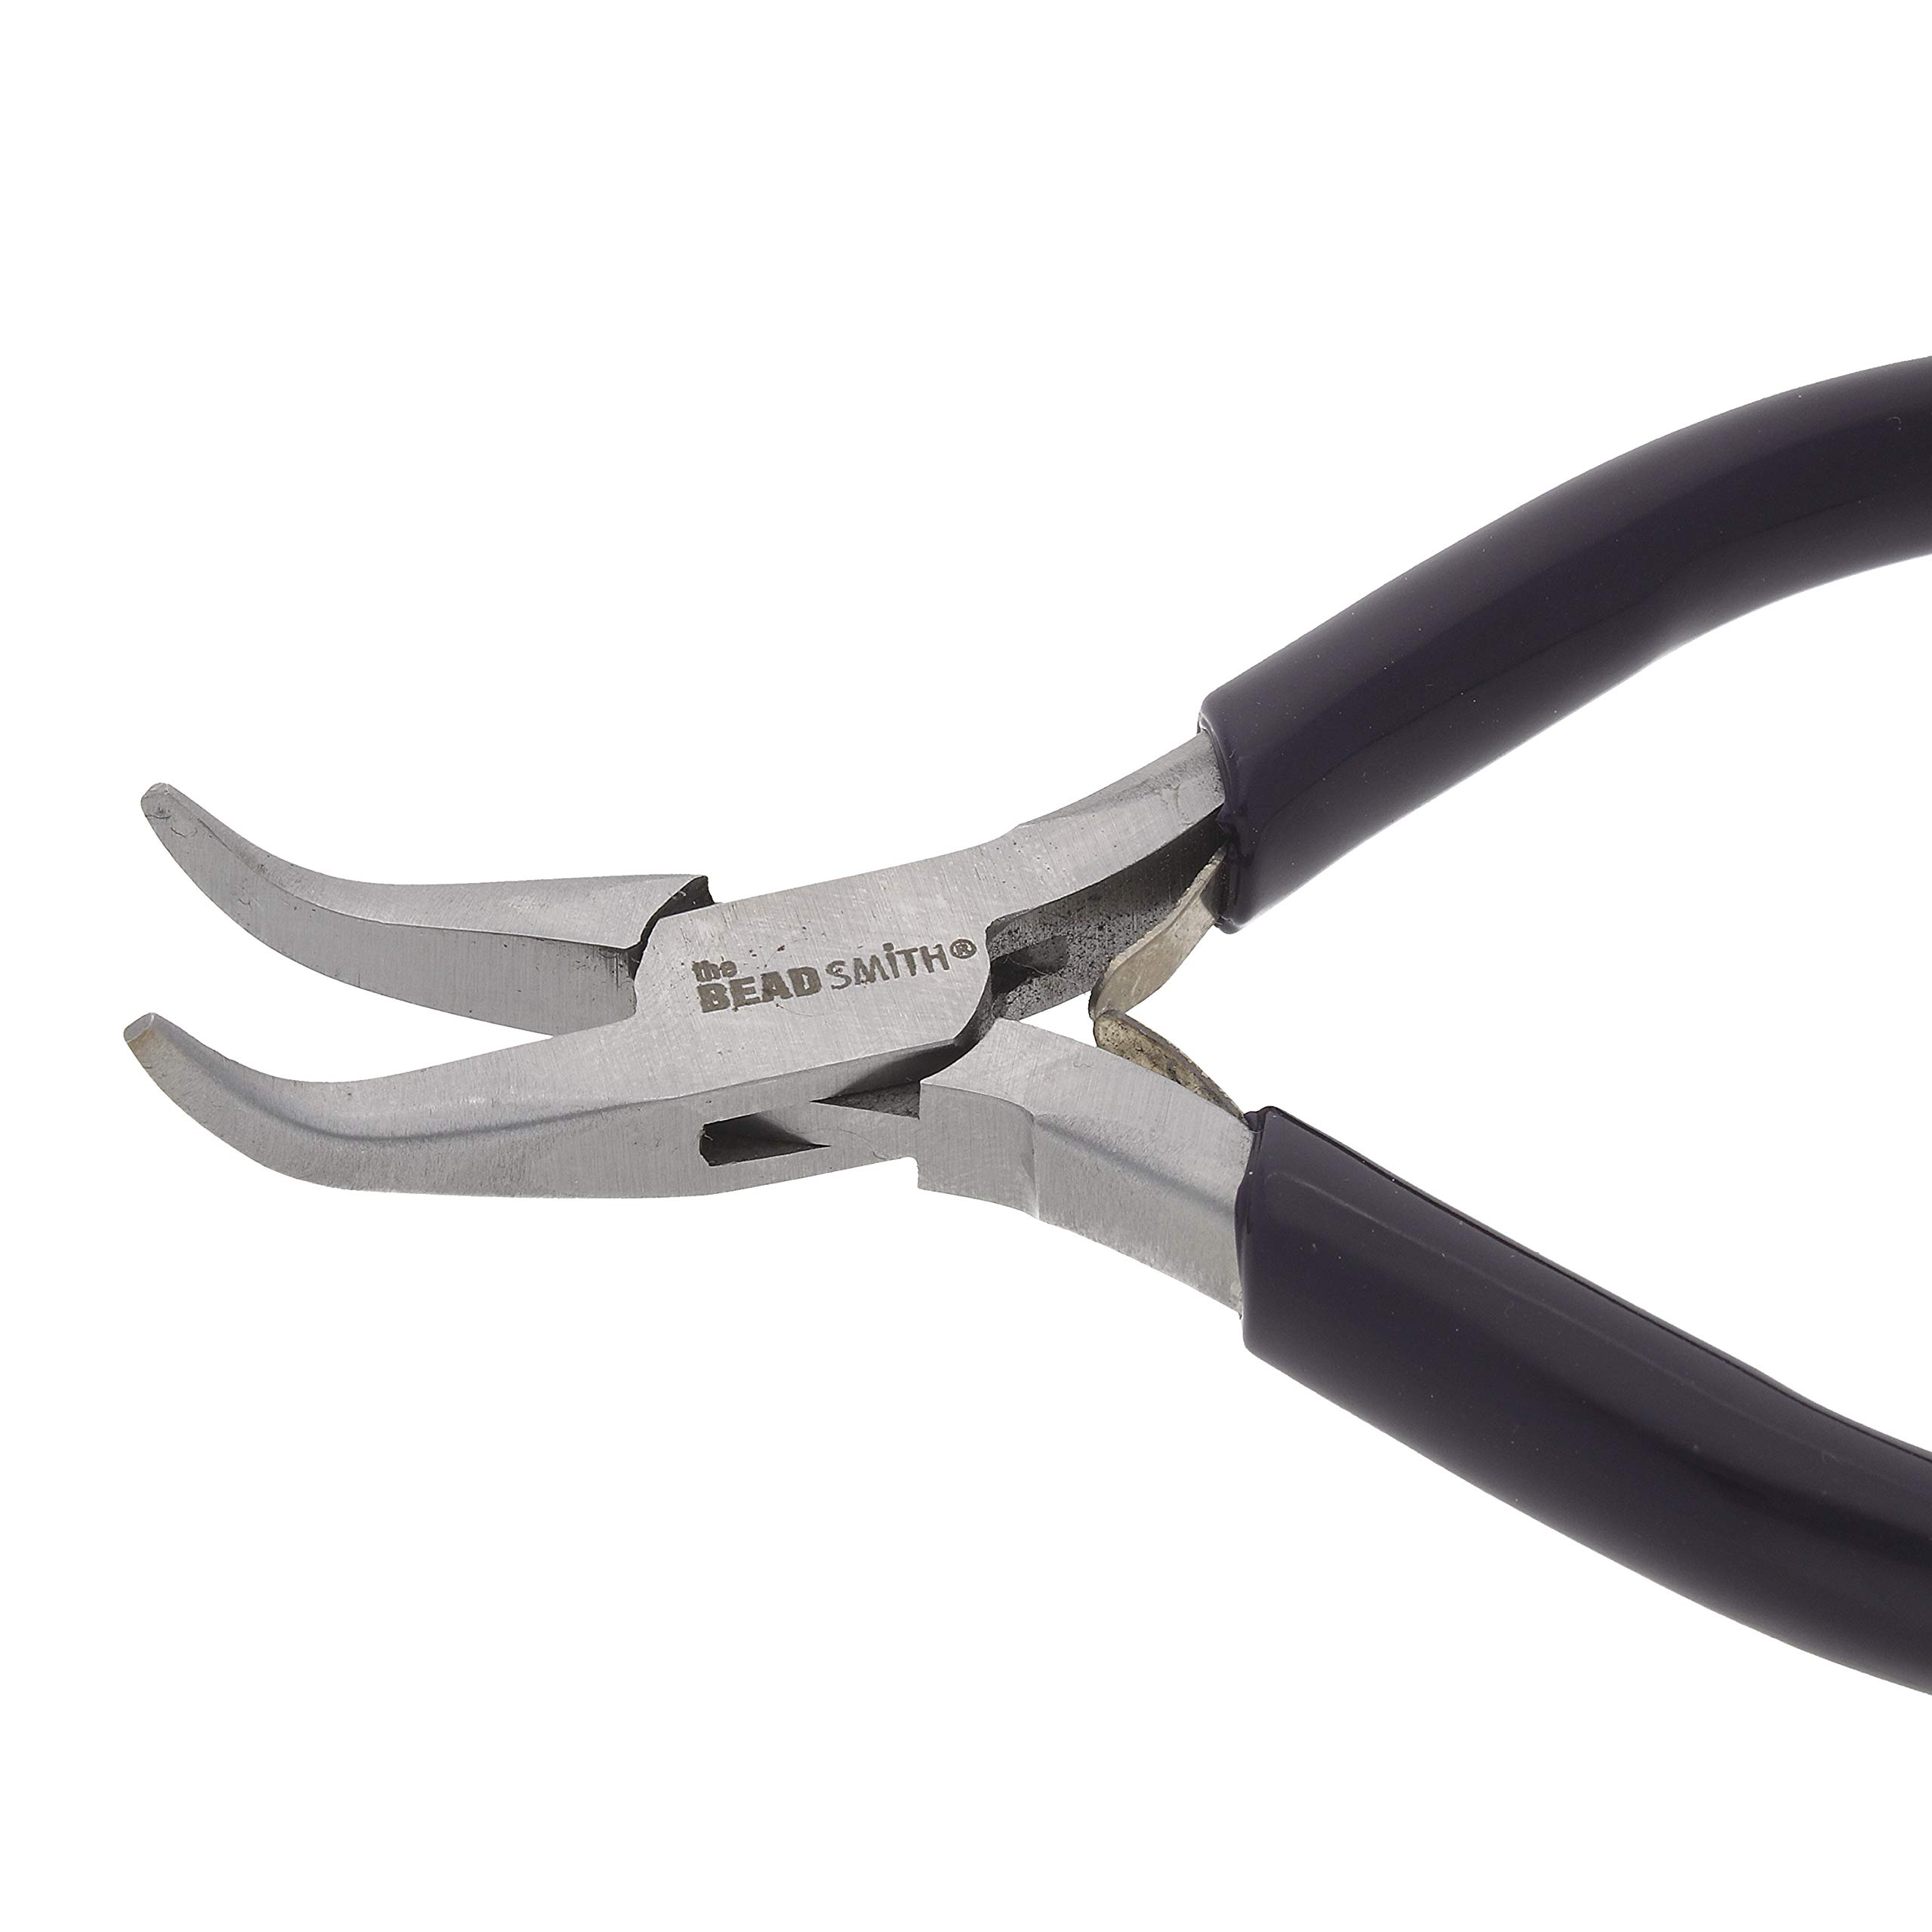 The Beadsmith Bent Chain-Nose Pliers for Crafting and Repair